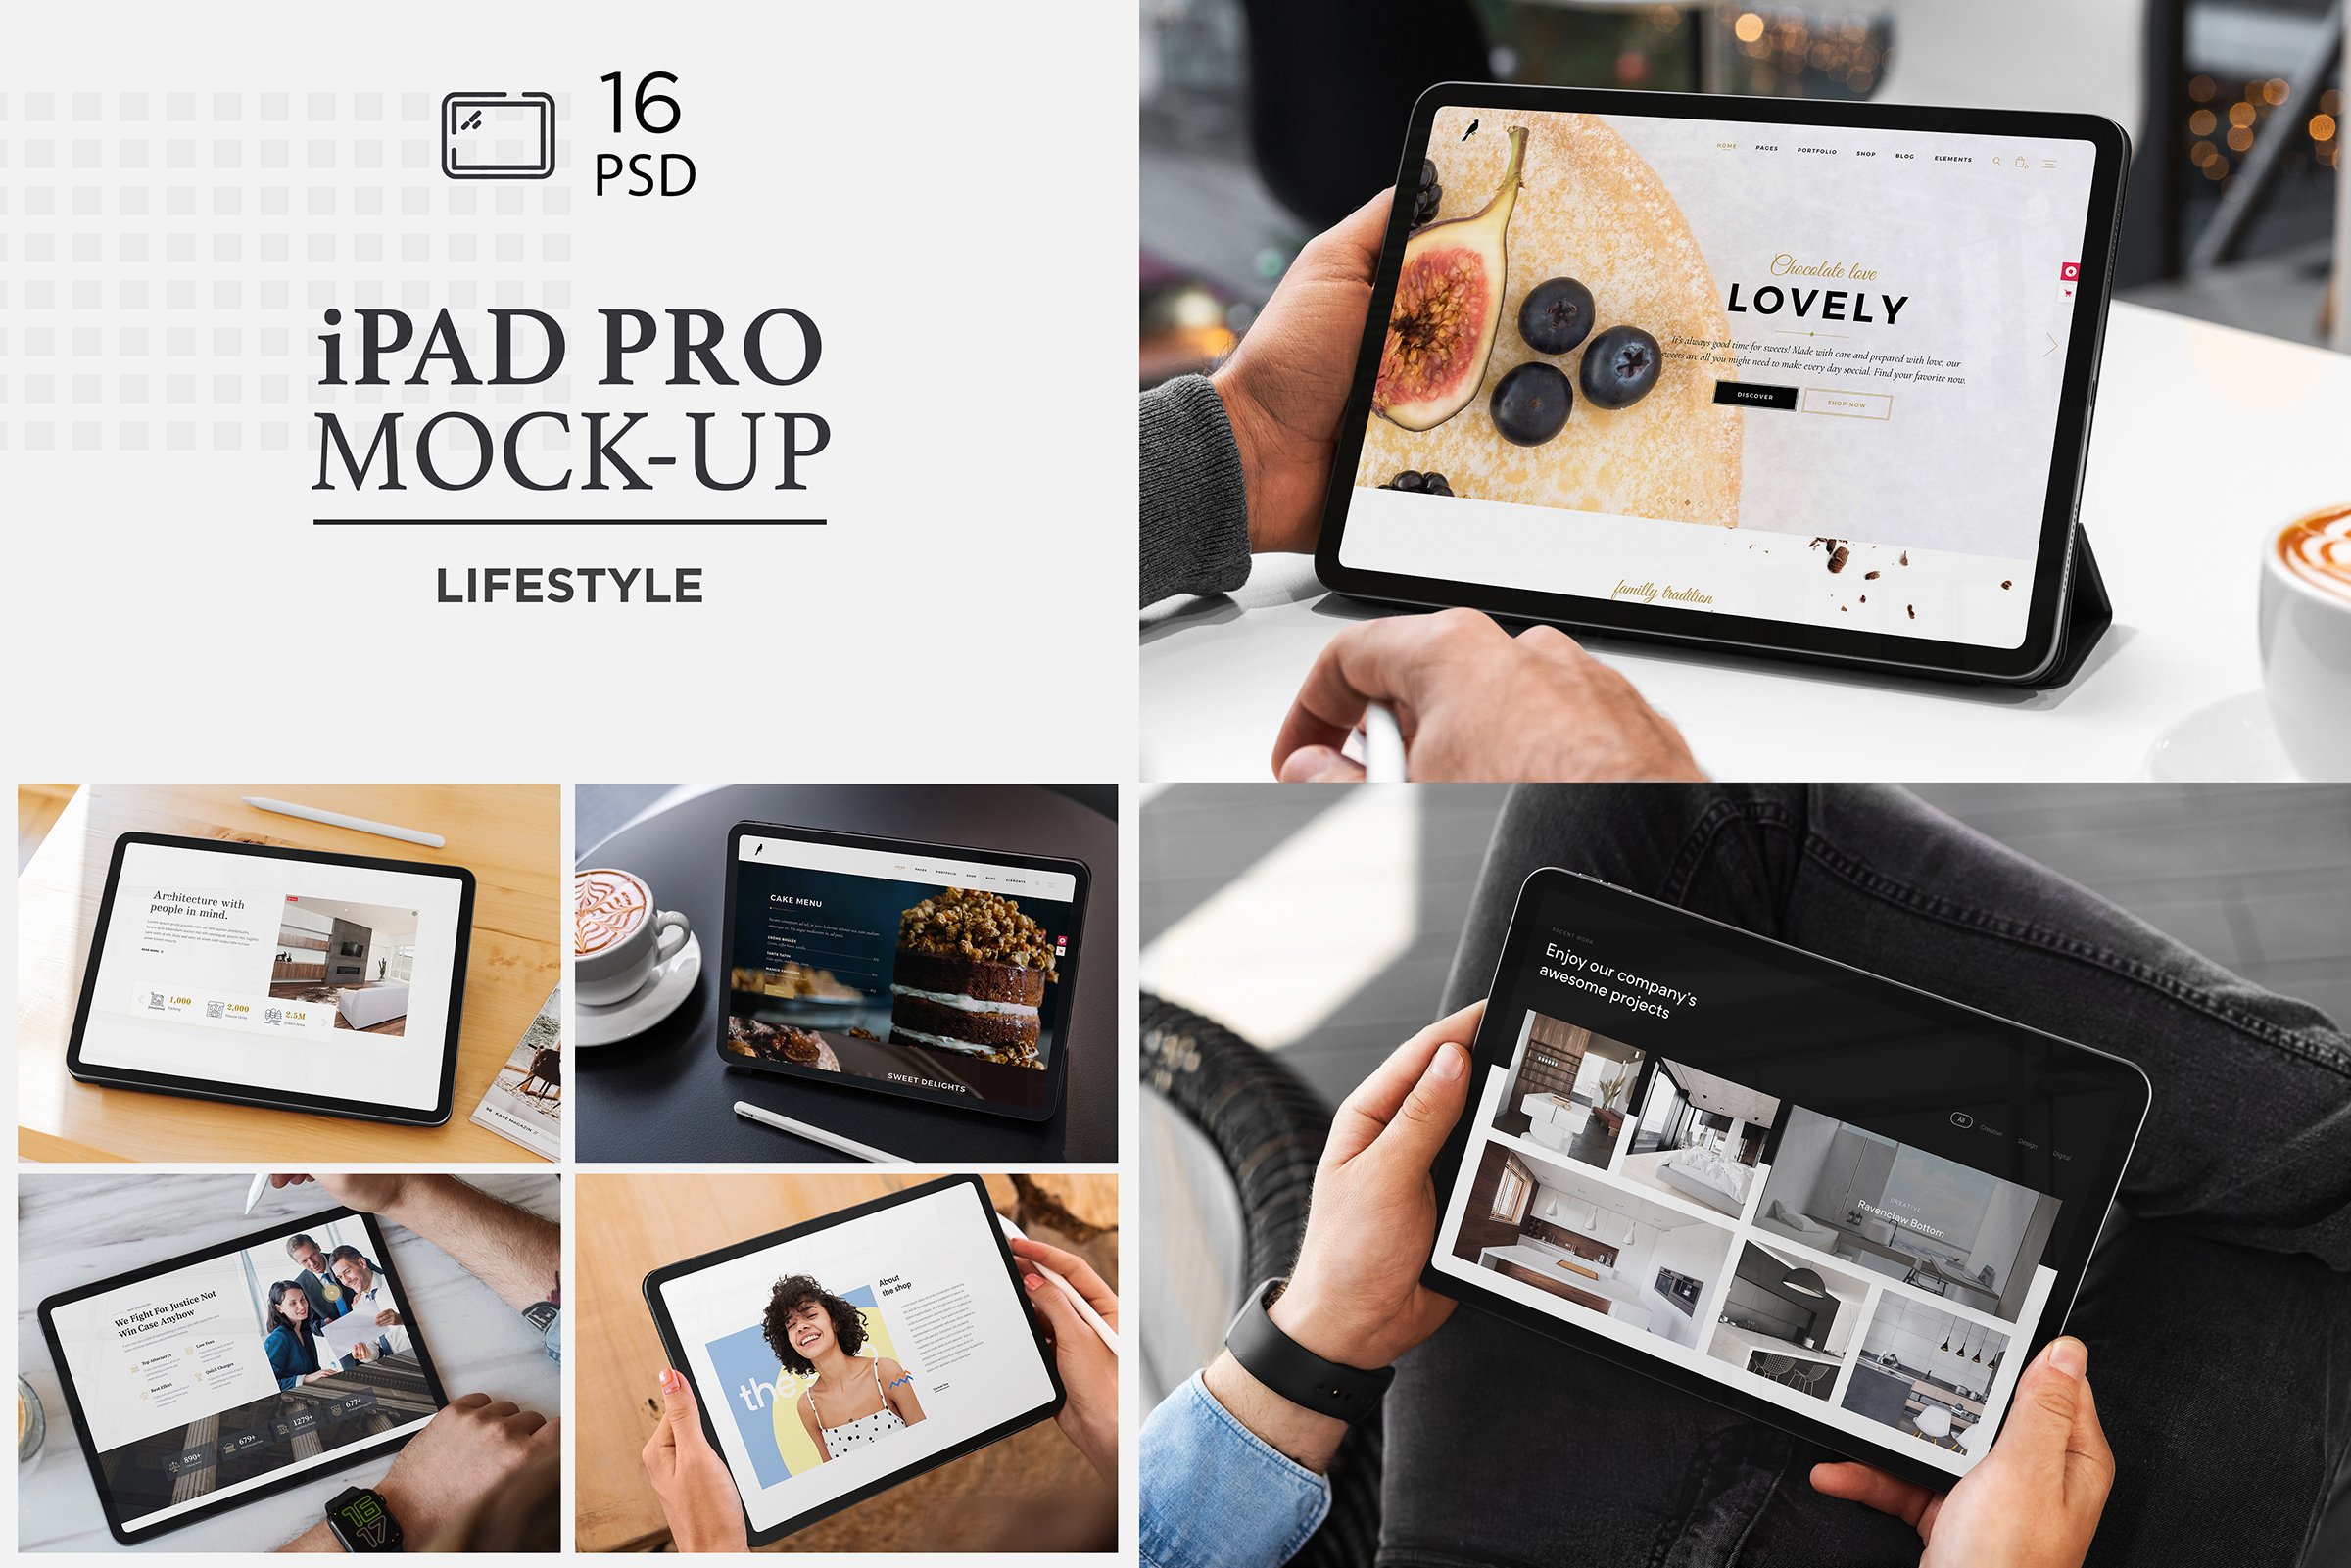 iPad Pro Responsive Mock-Up cover image.